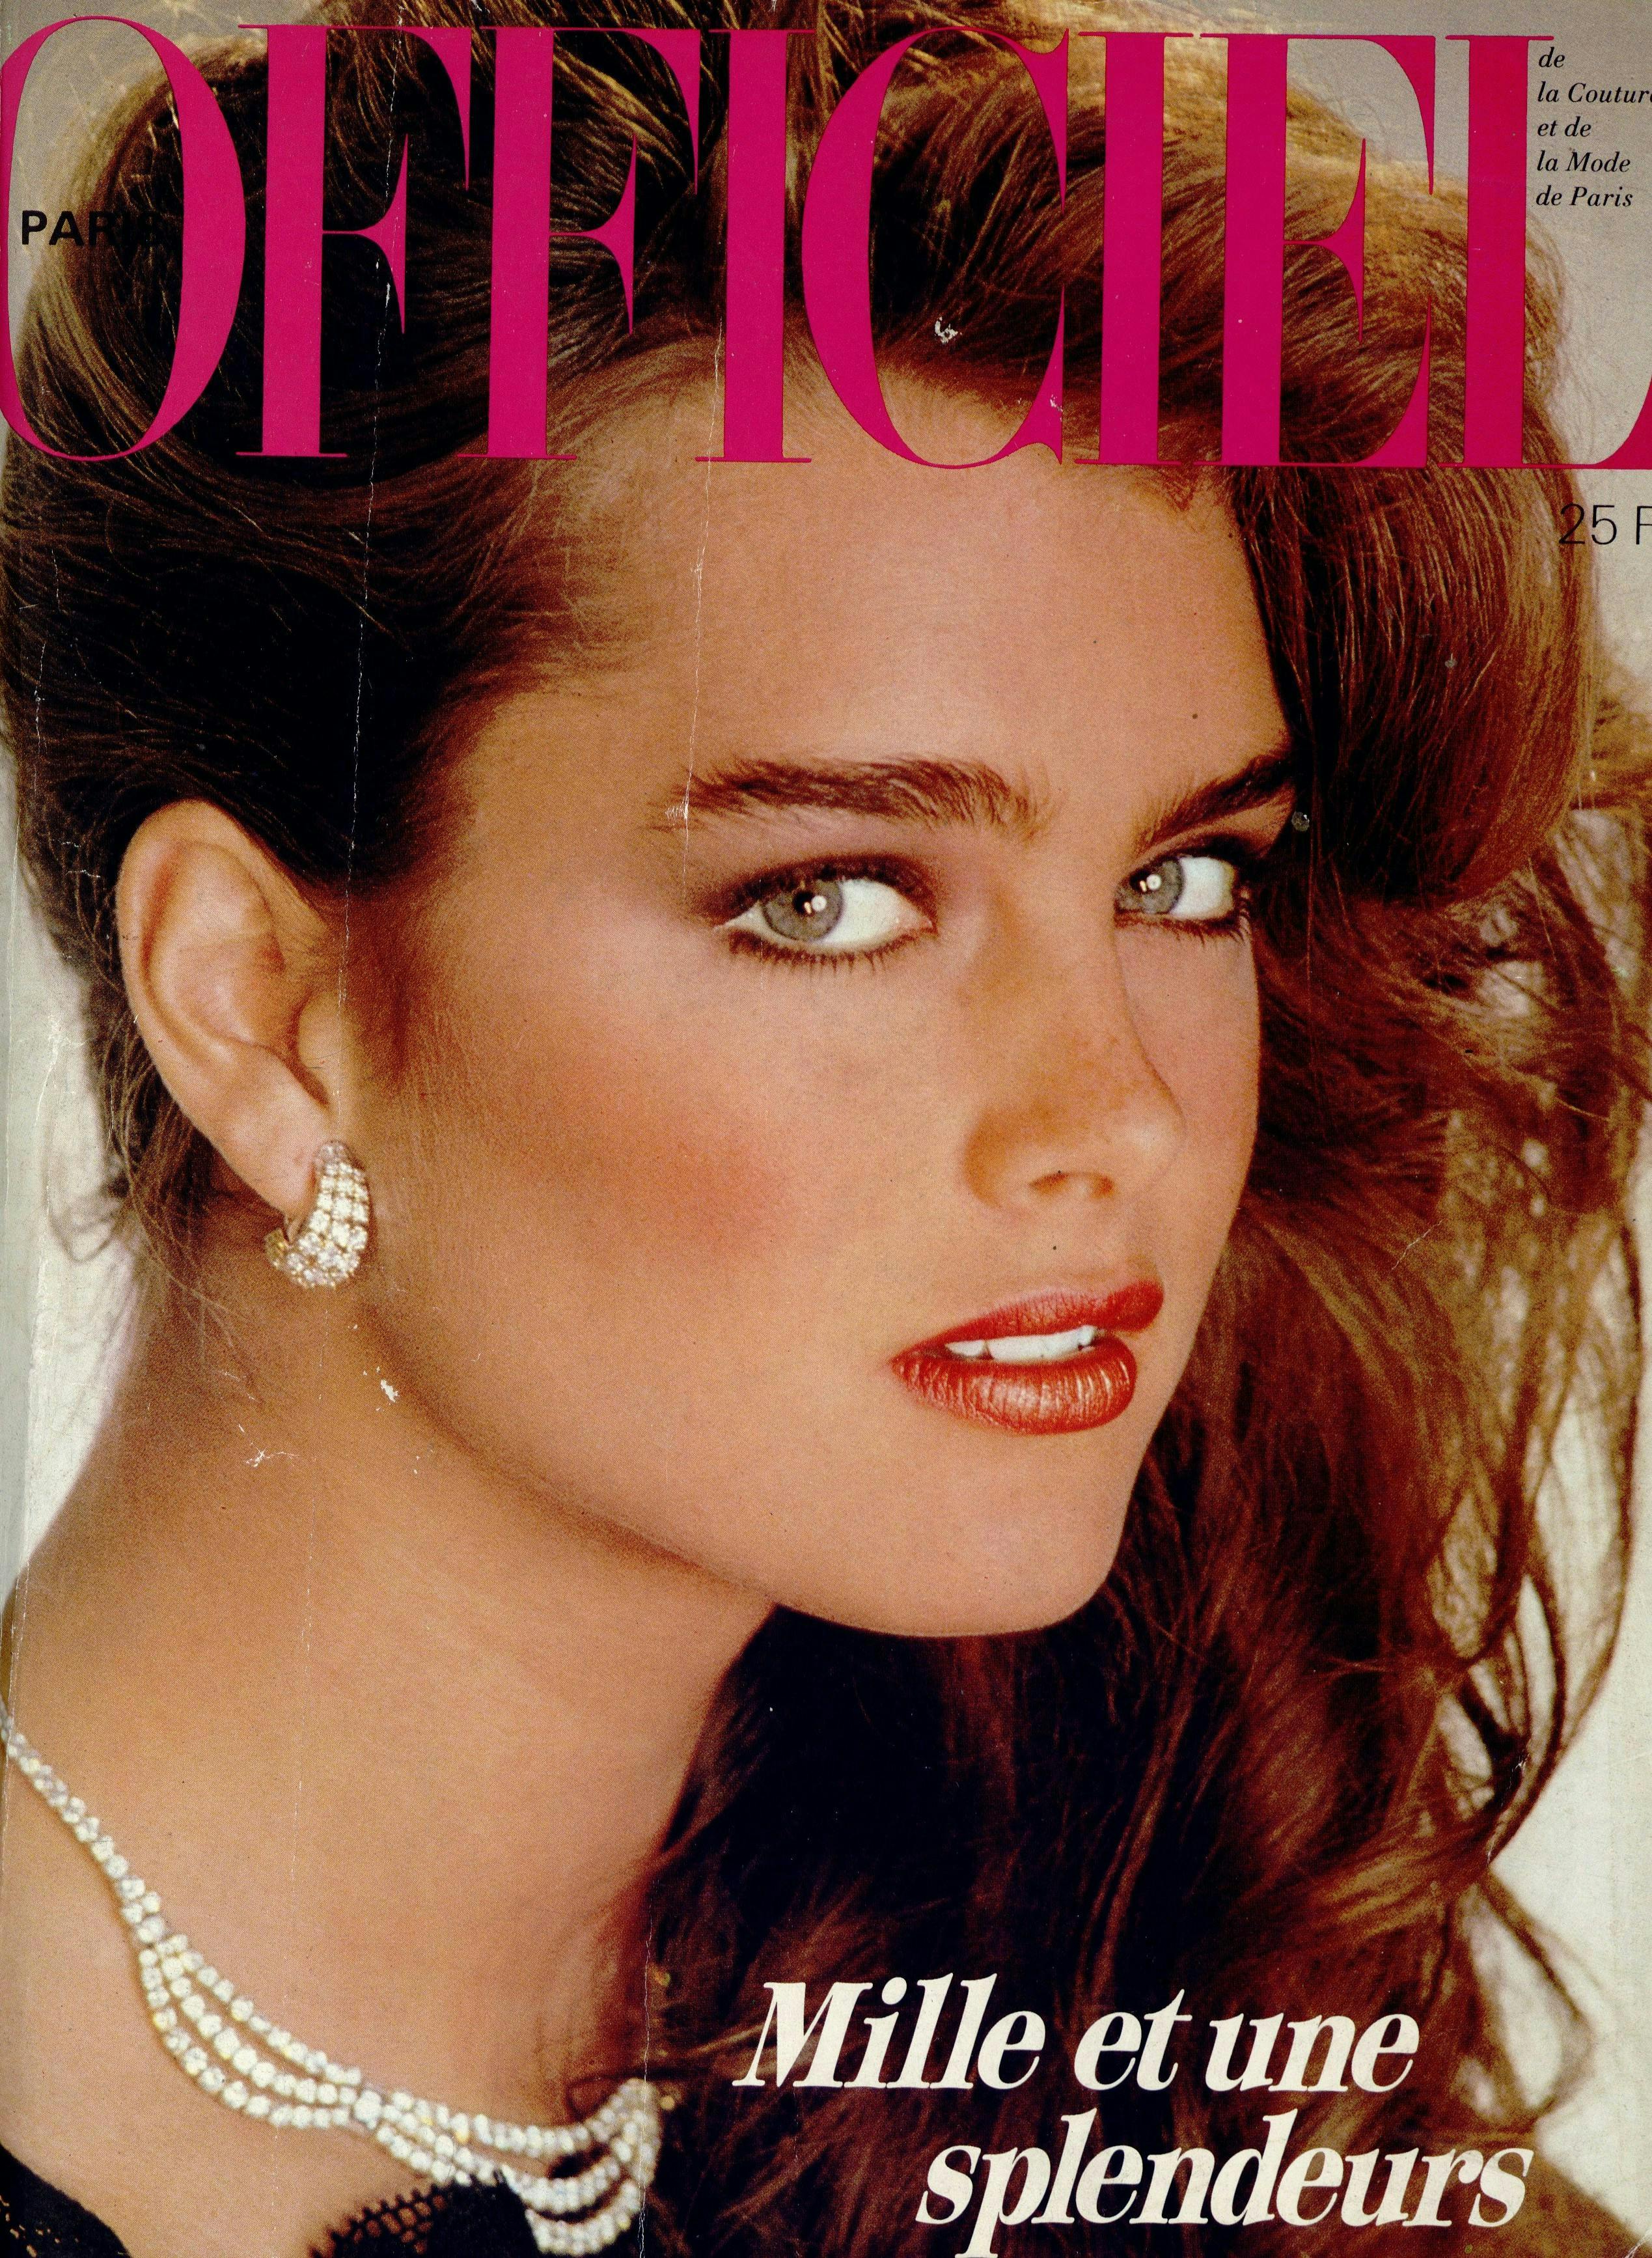 From the Cover of L'OFFICIEL to Her Calvin Klein Ad: Photos of Young ...